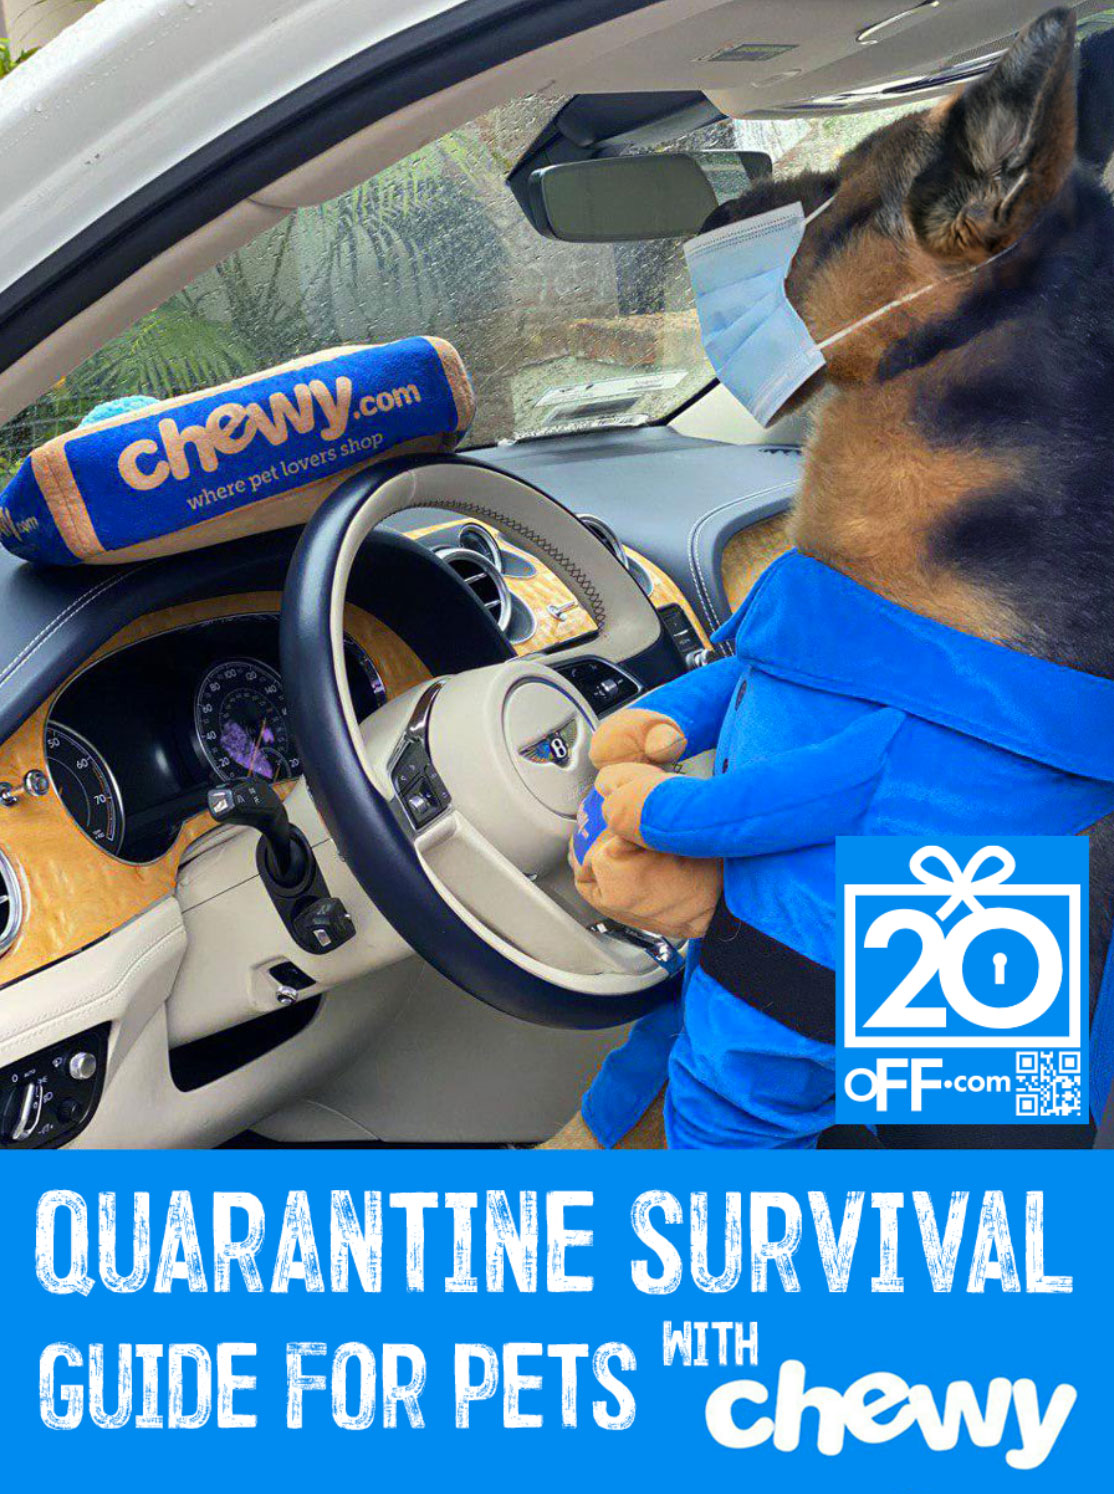 Chewy Quarantine Survival Guide